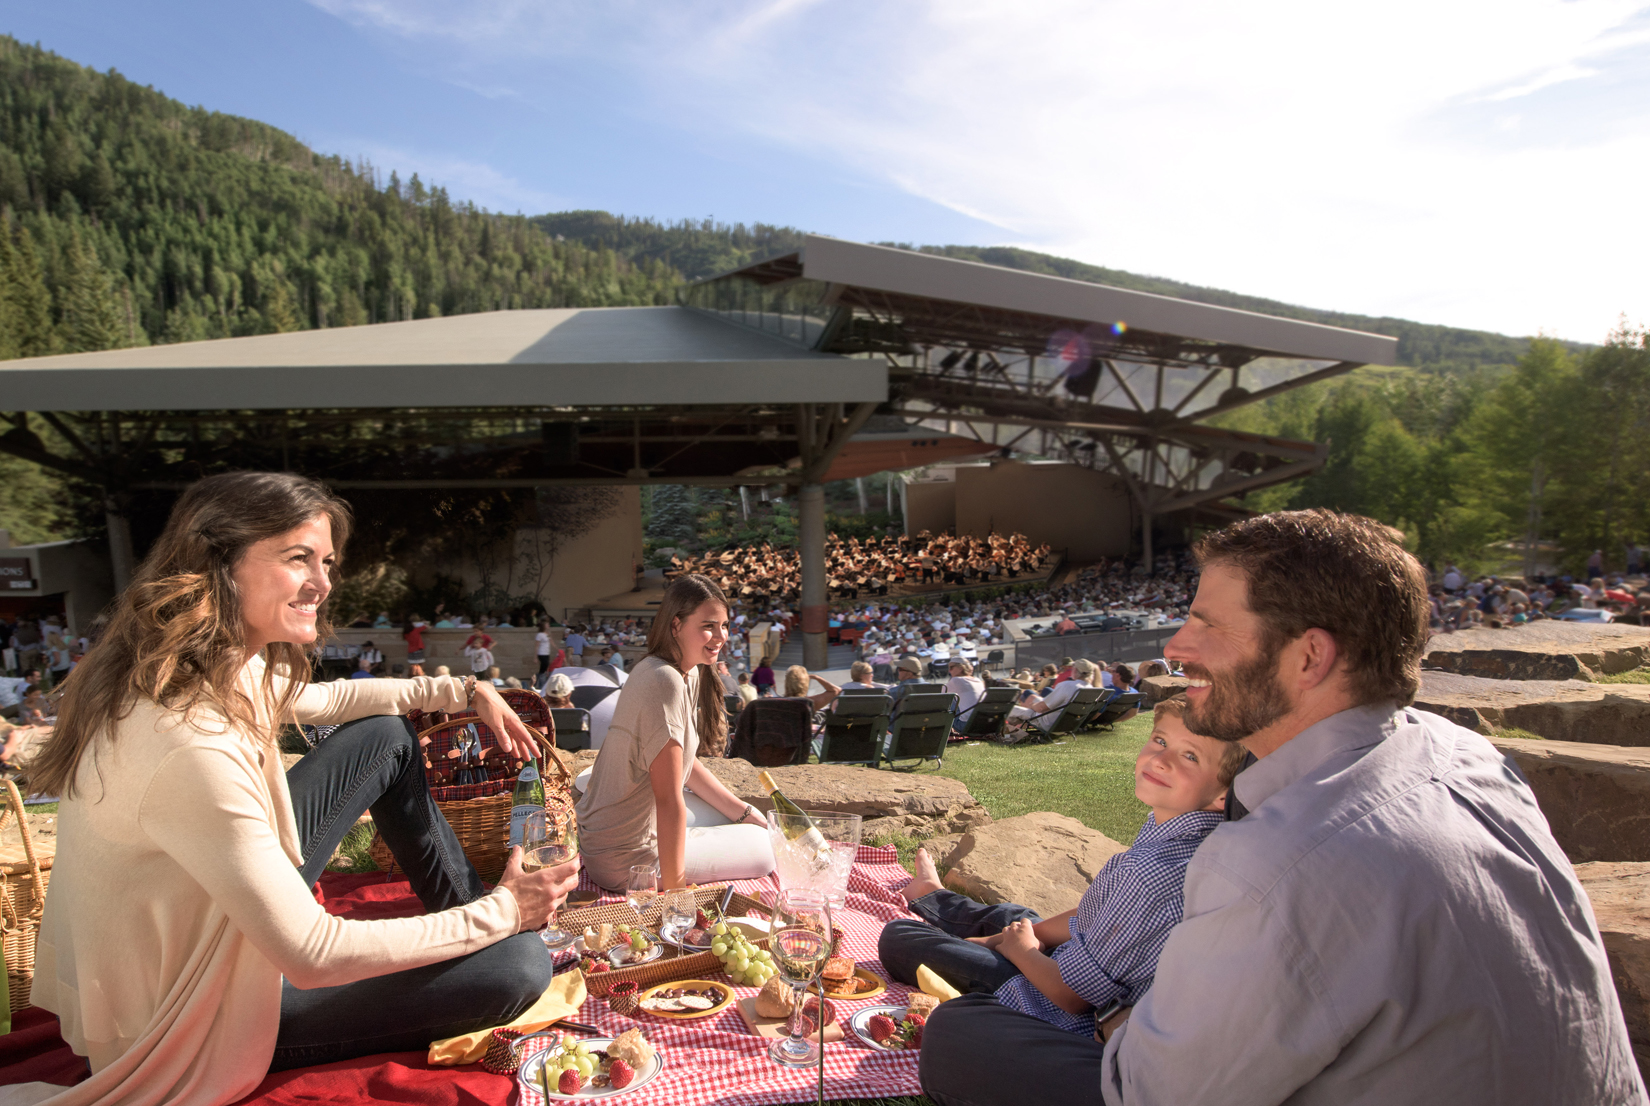 Bravo! Vail brings America’s top orchestras to the mountains each year, and Antlers at Vail hotel’s Ultimate Vail 30-day package guests receive free lawn tickets to enjoy the music (© Jack Affleck).